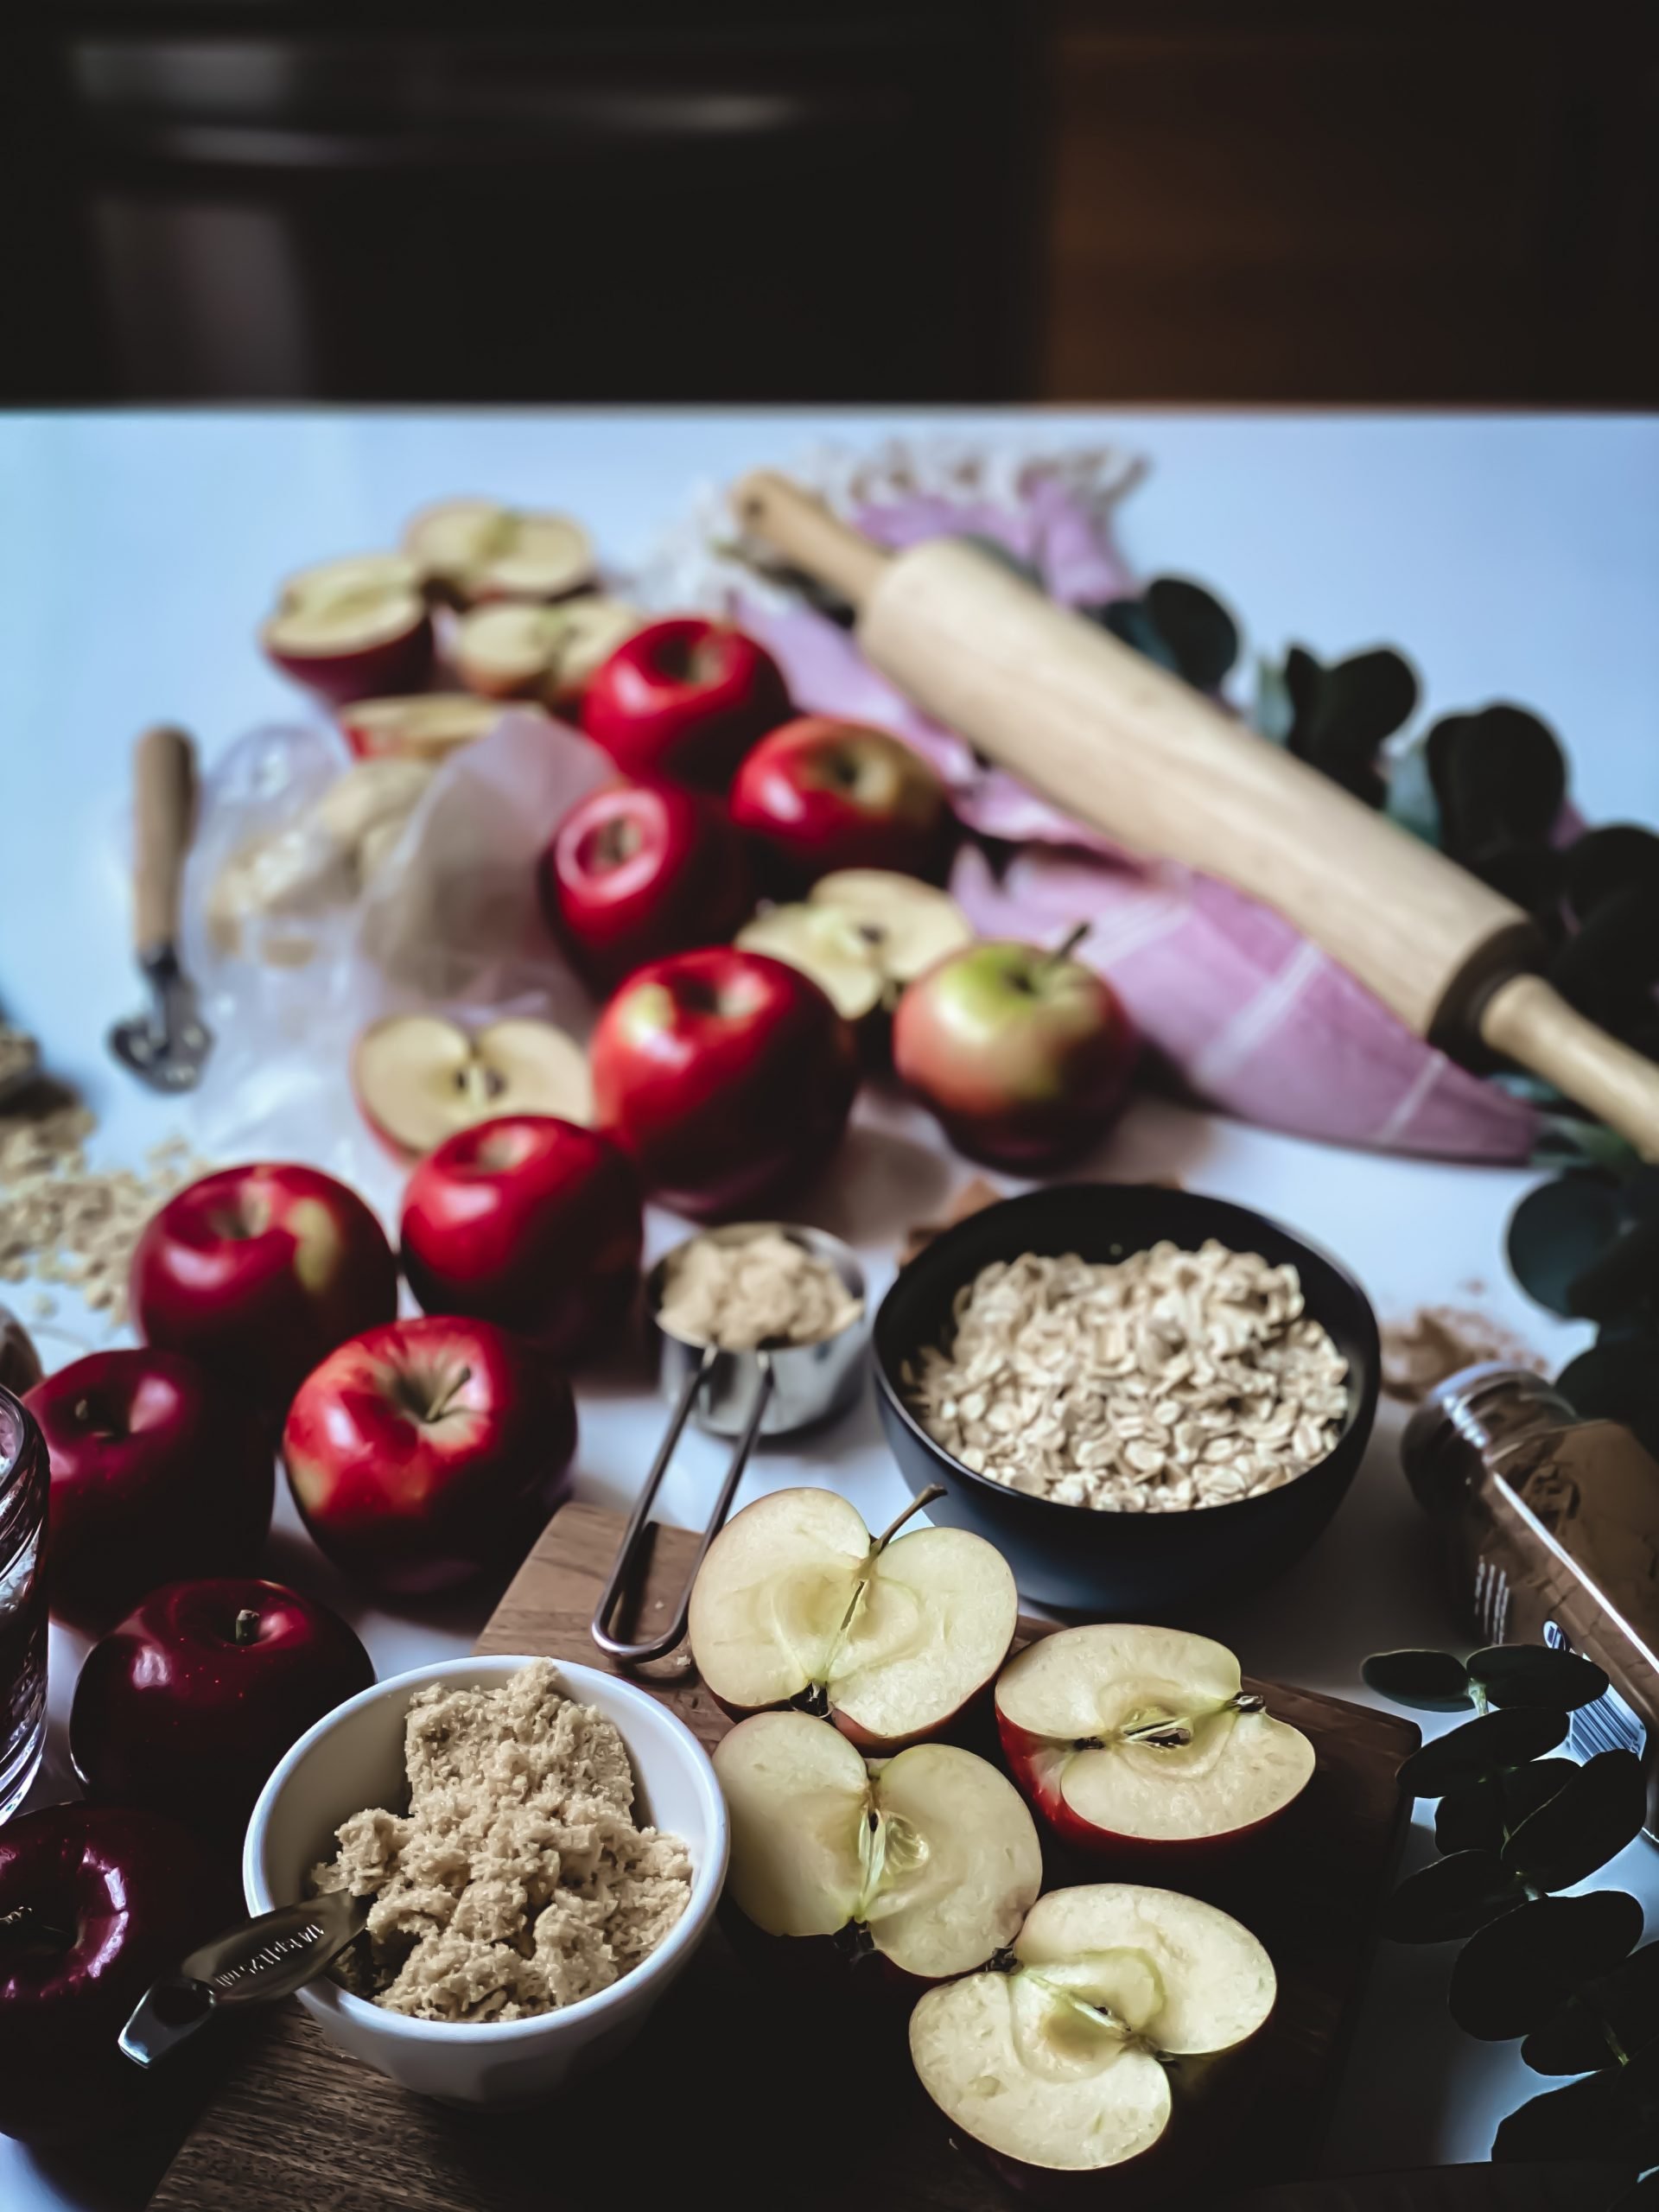 red apples, baking ingredients , a rolling bin and oats all styled on a counter top